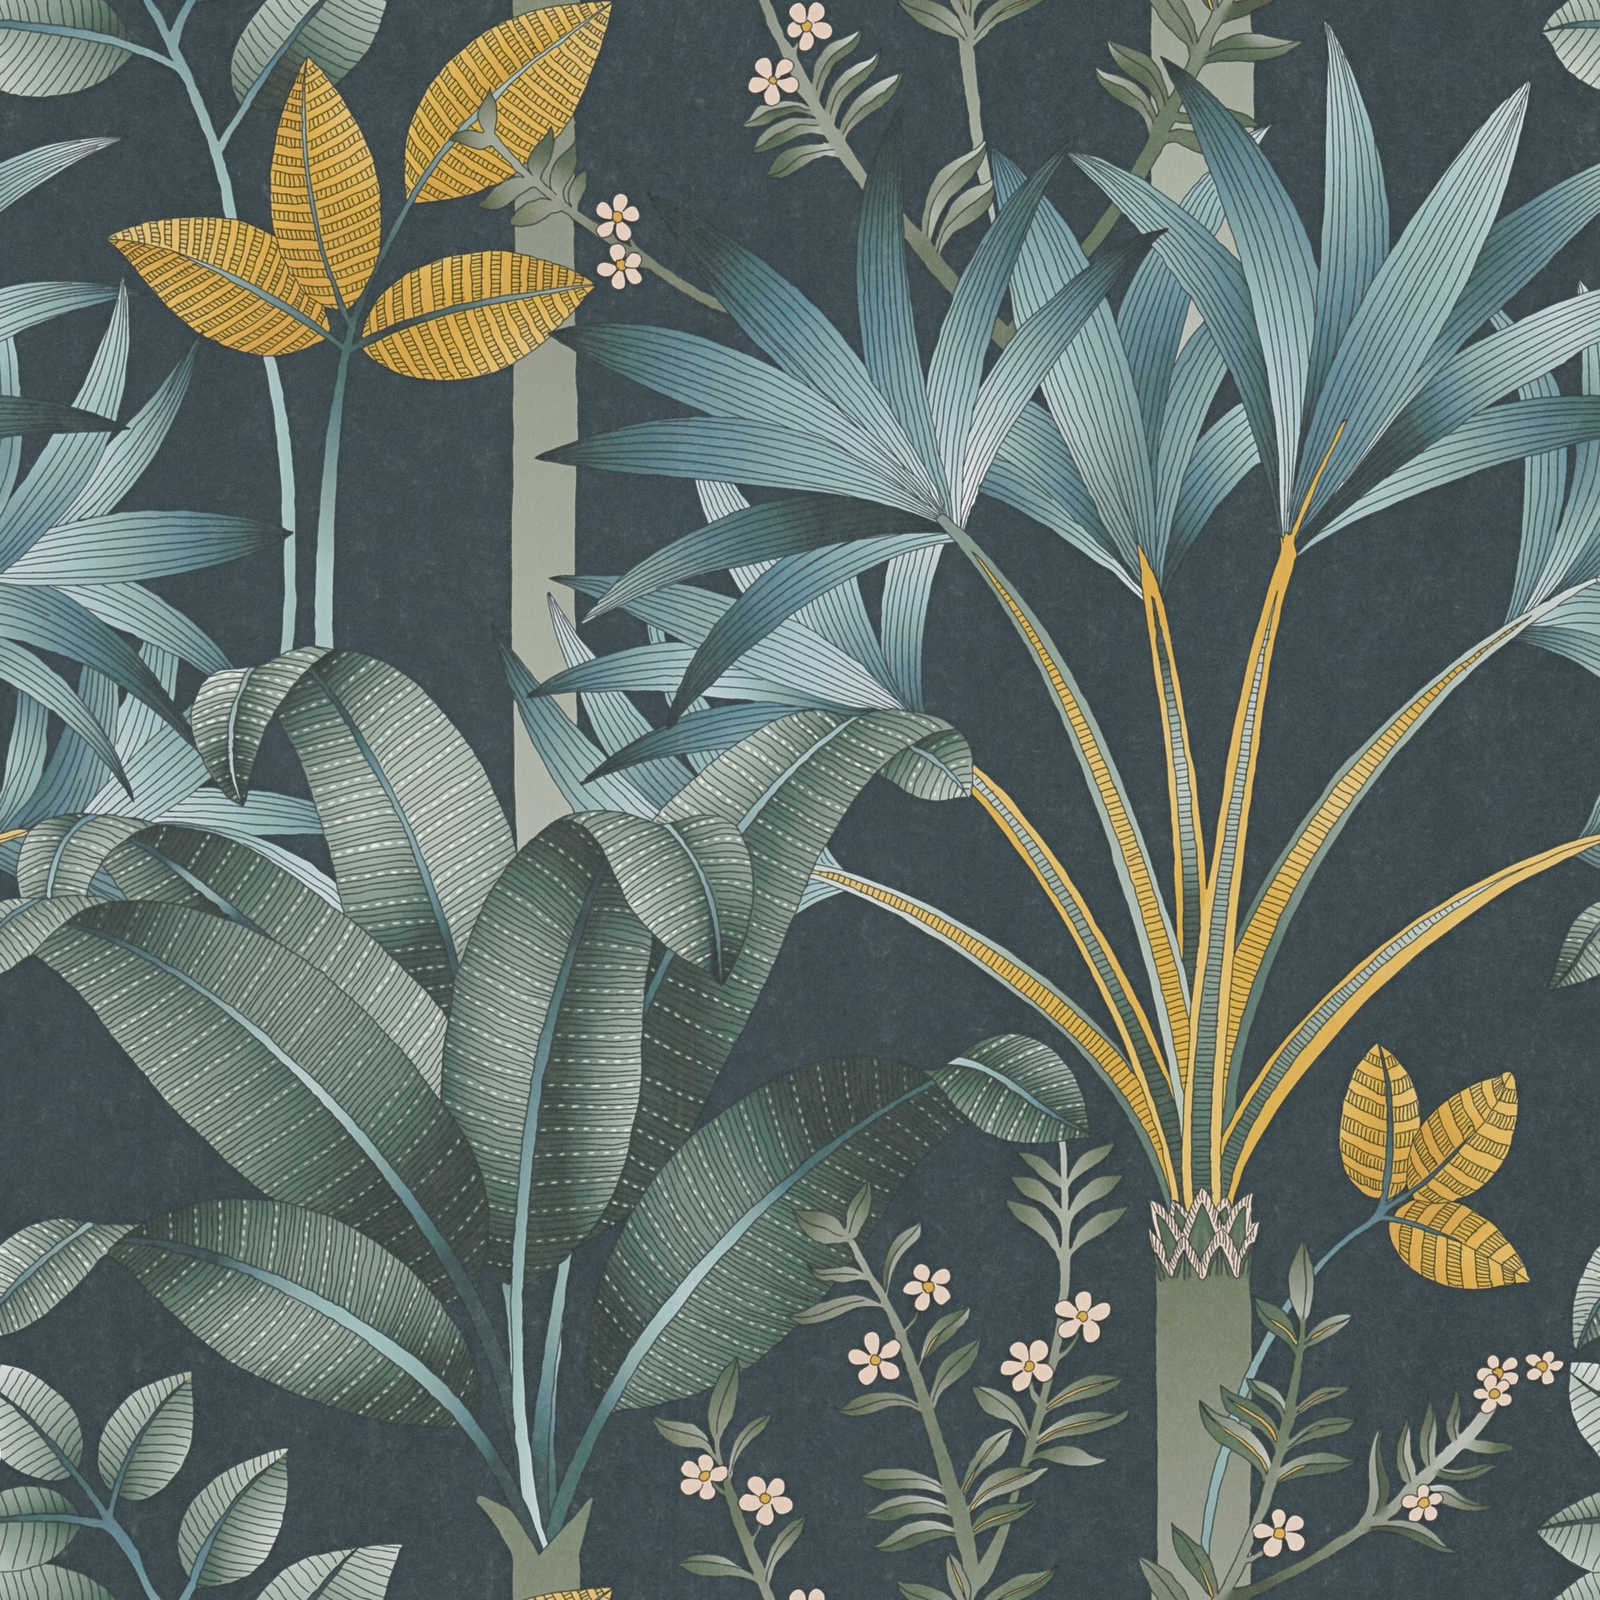 Floral non-woven wallpaper with leaf pattern - multicoloured, petrol, green
